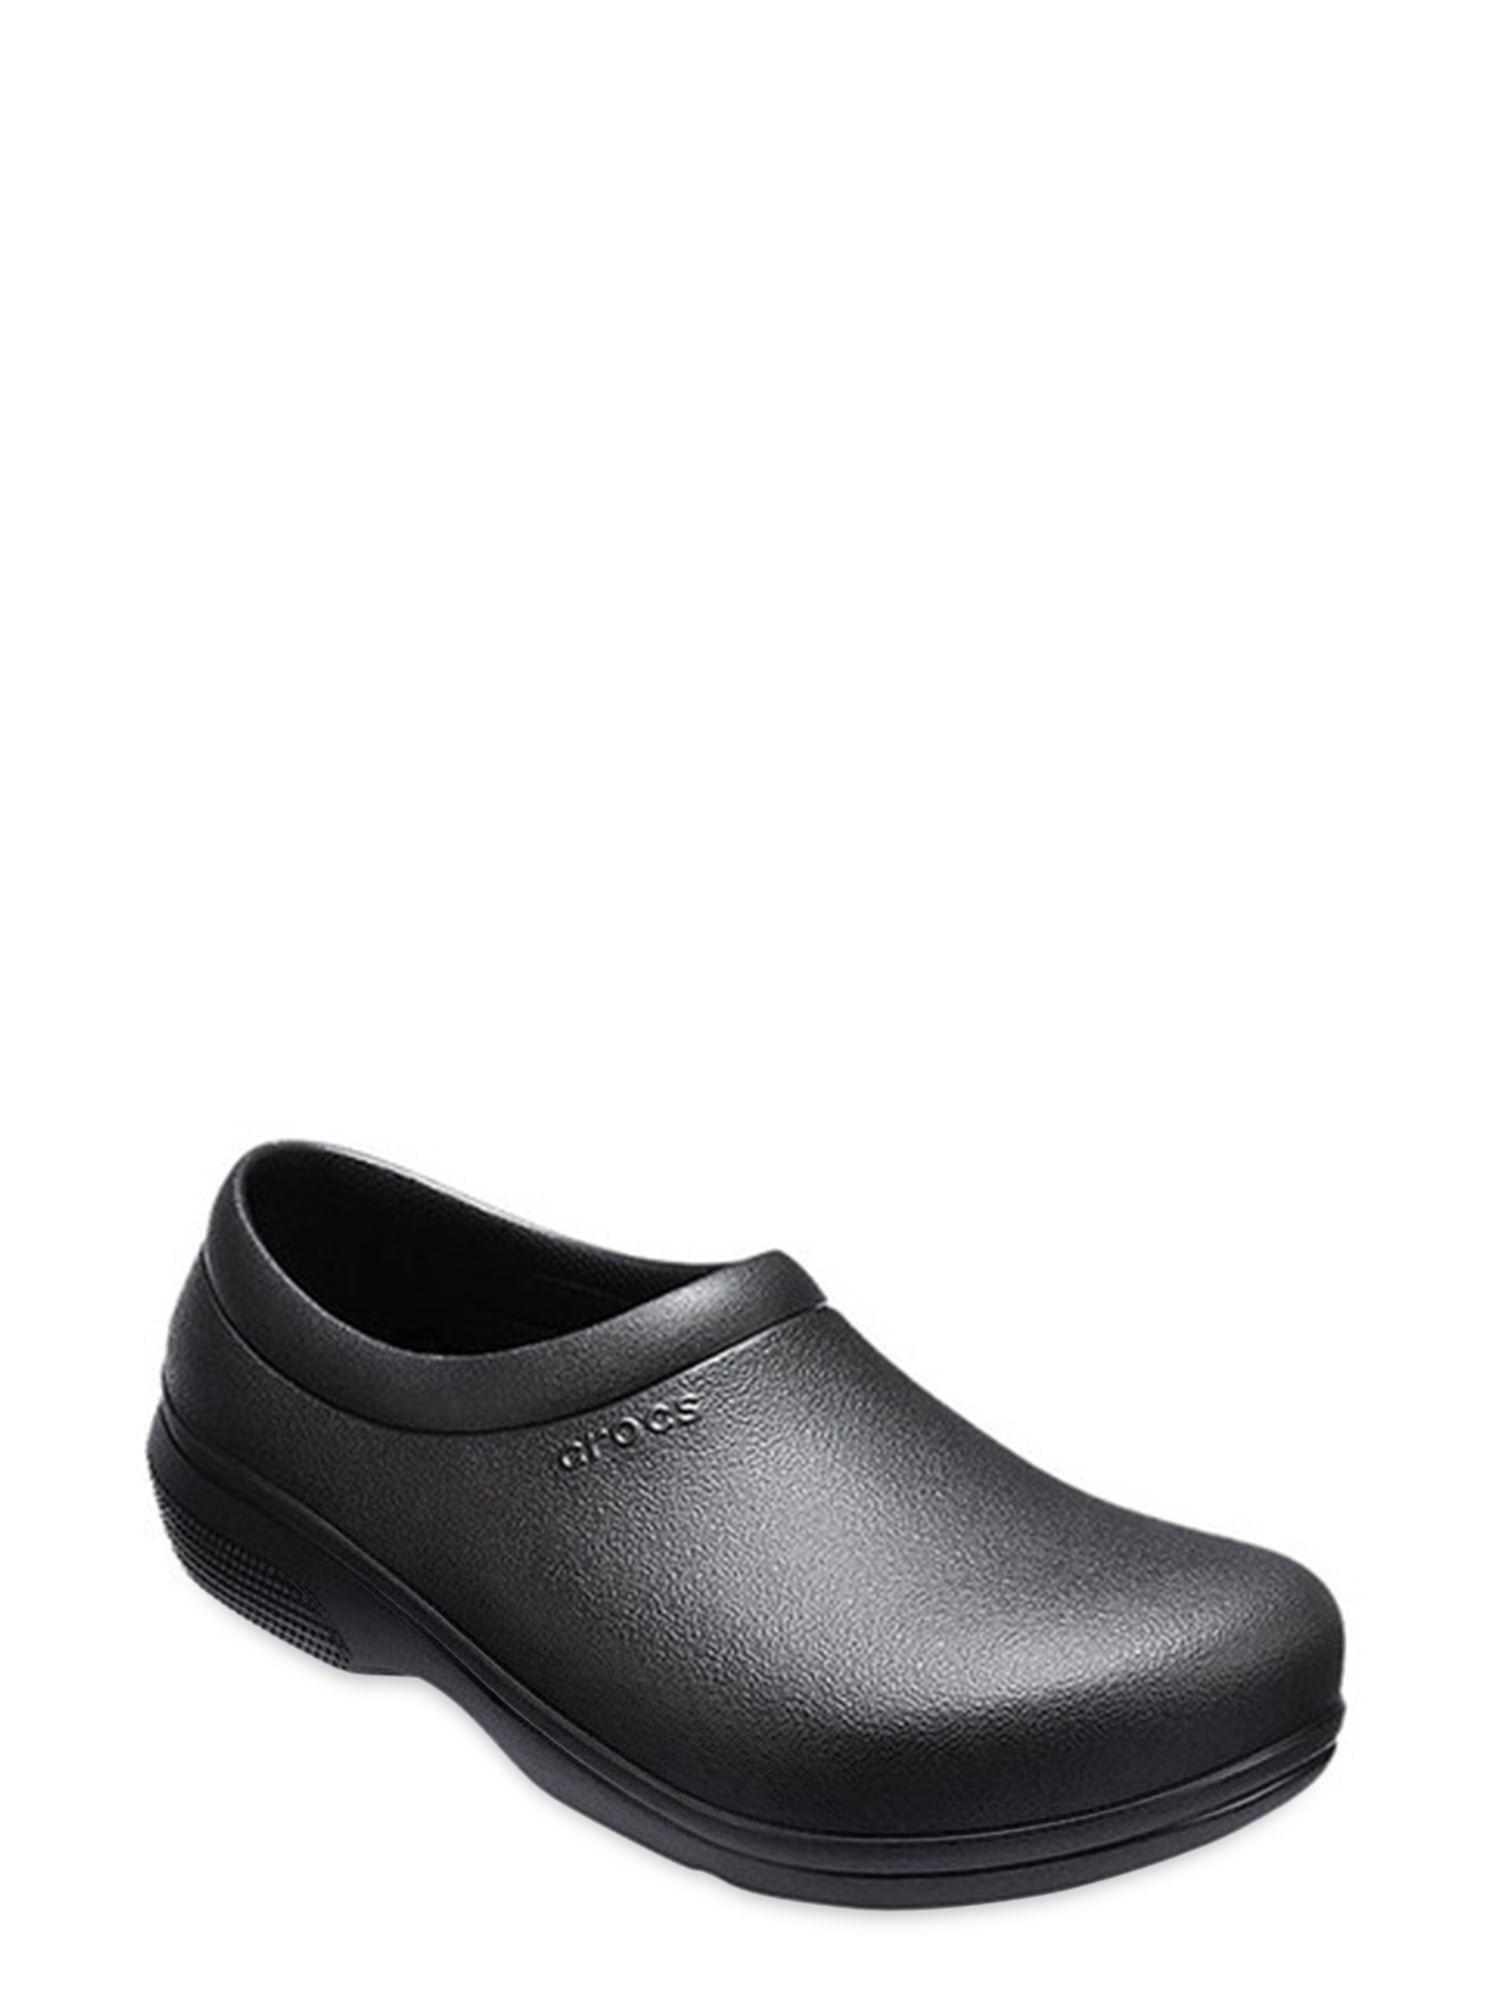 Canvas Crocs Slippers at Rs 2272 in Ghaziabad | ID: 23479314062-saigonsouth.com.vn